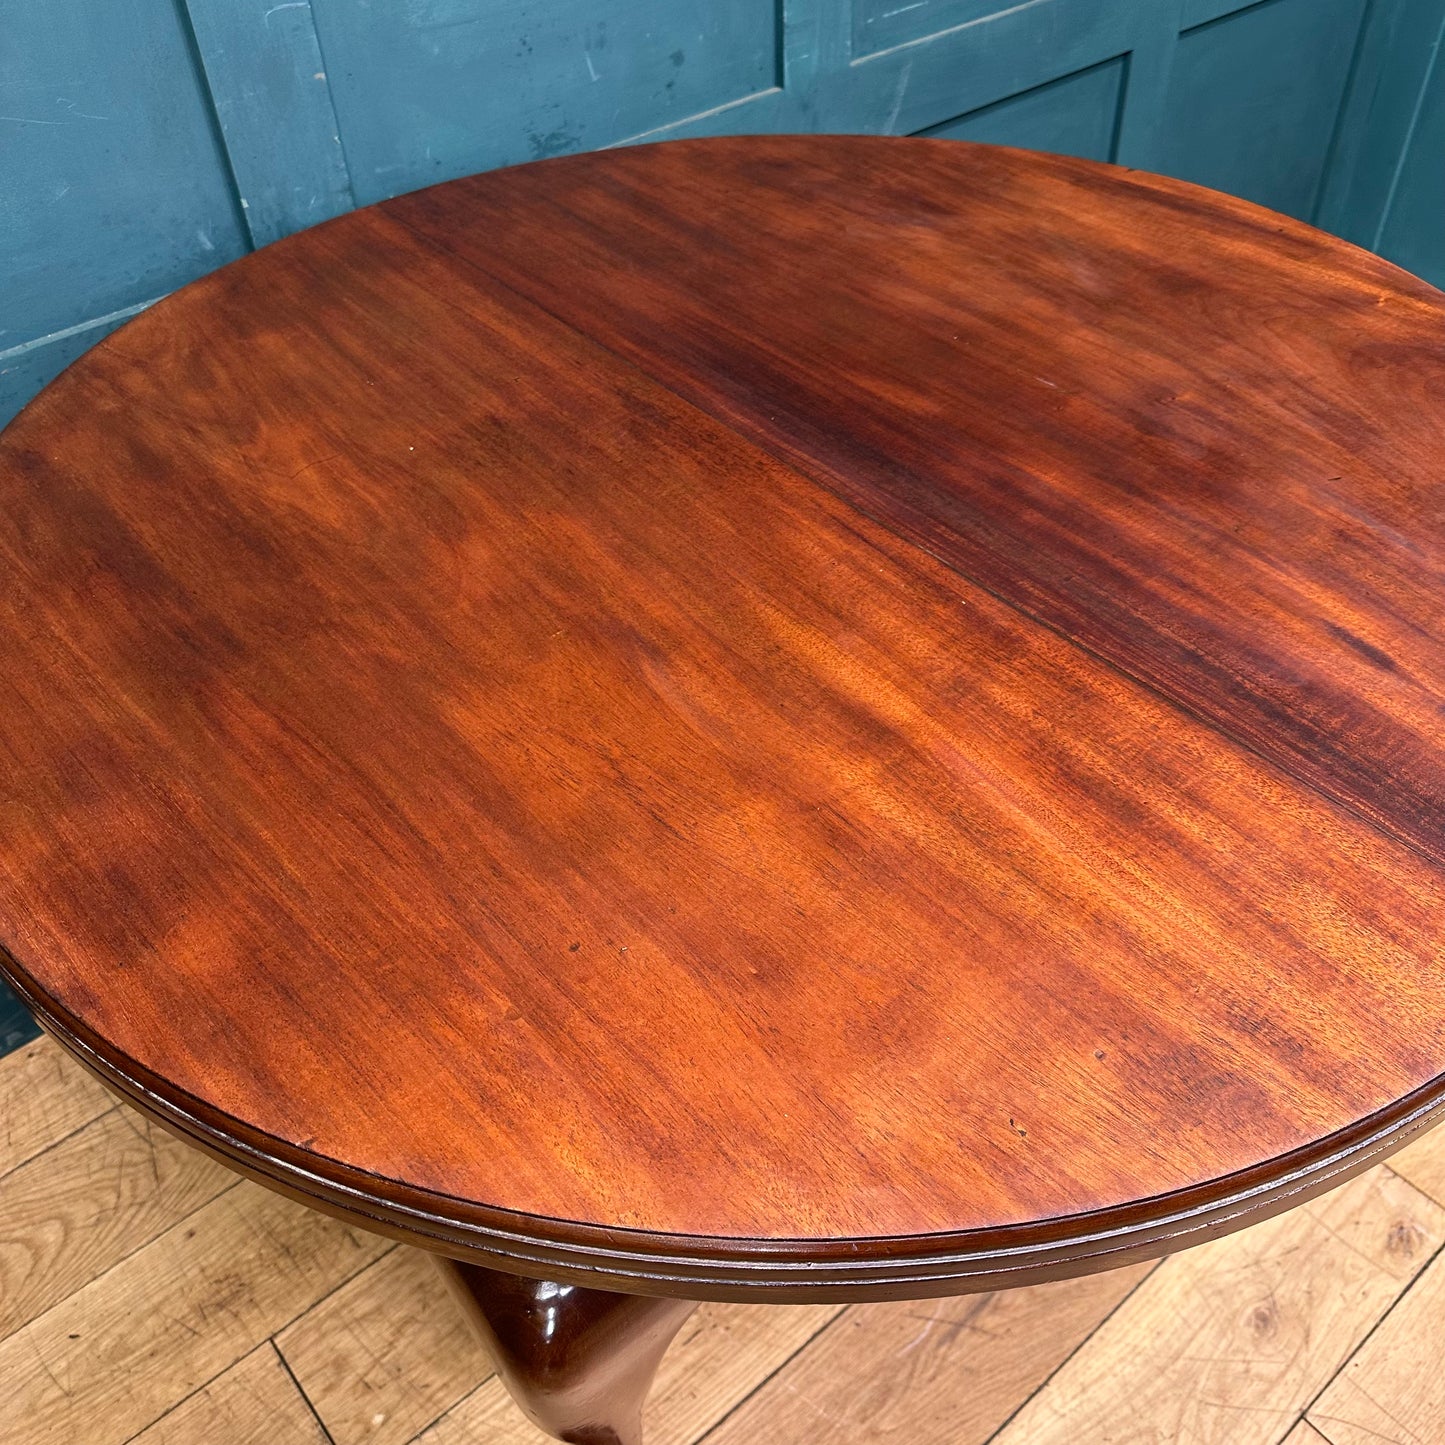 Antique Mahogany Wind Out Dining Table / Extending Table /Antique Kitchen Table